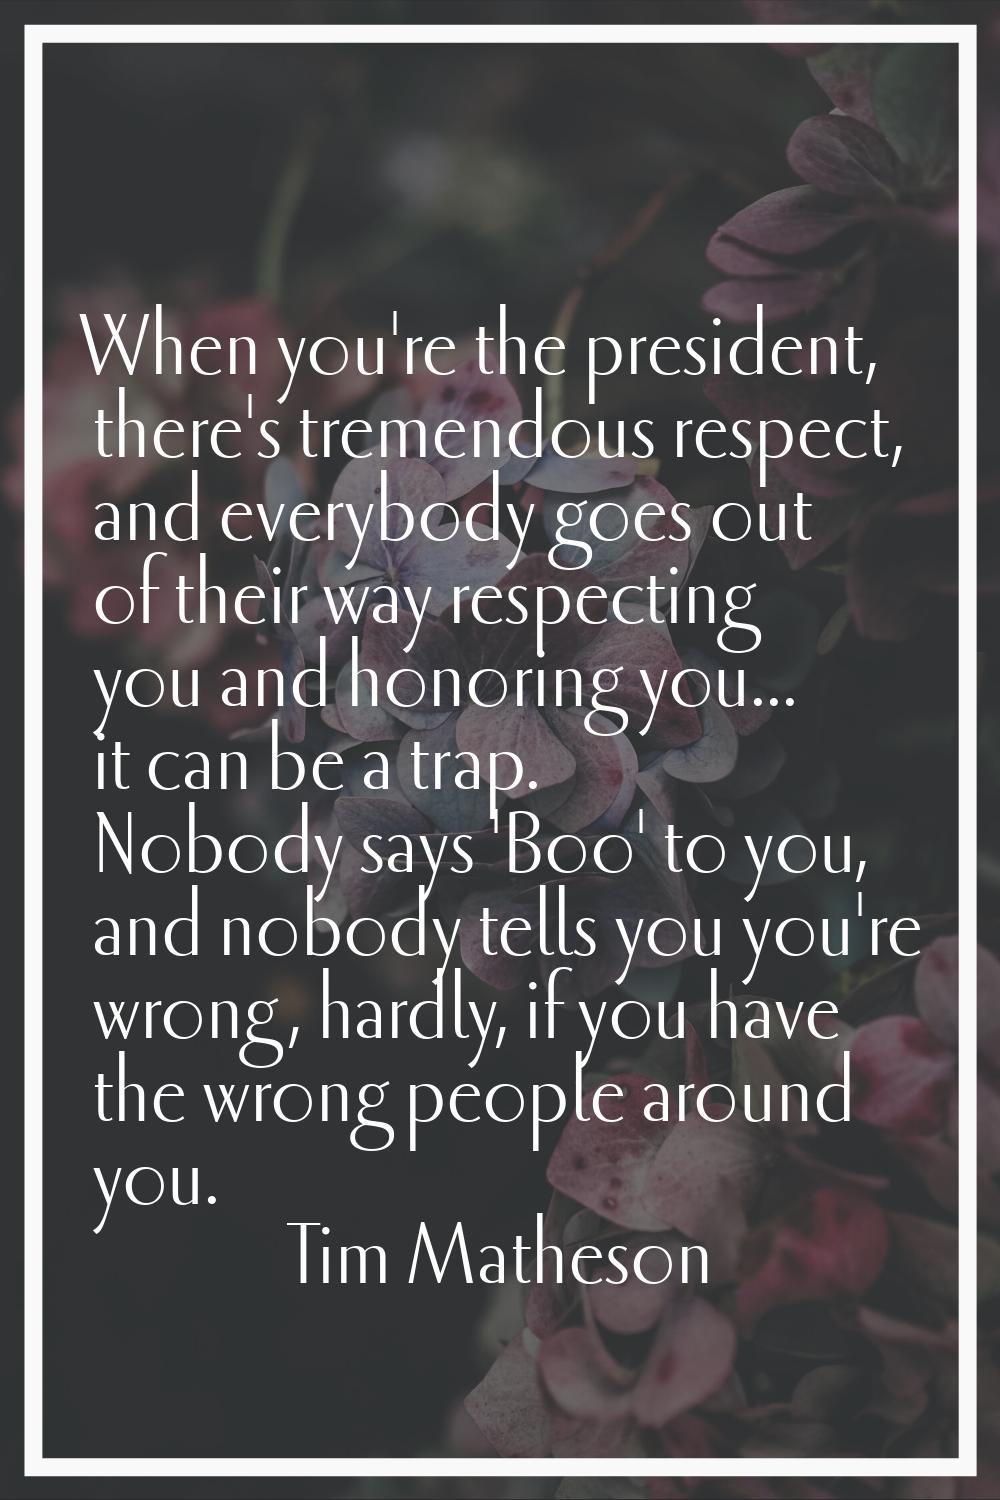 When you're the president, there's tremendous respect, and everybody goes out of their way respecti